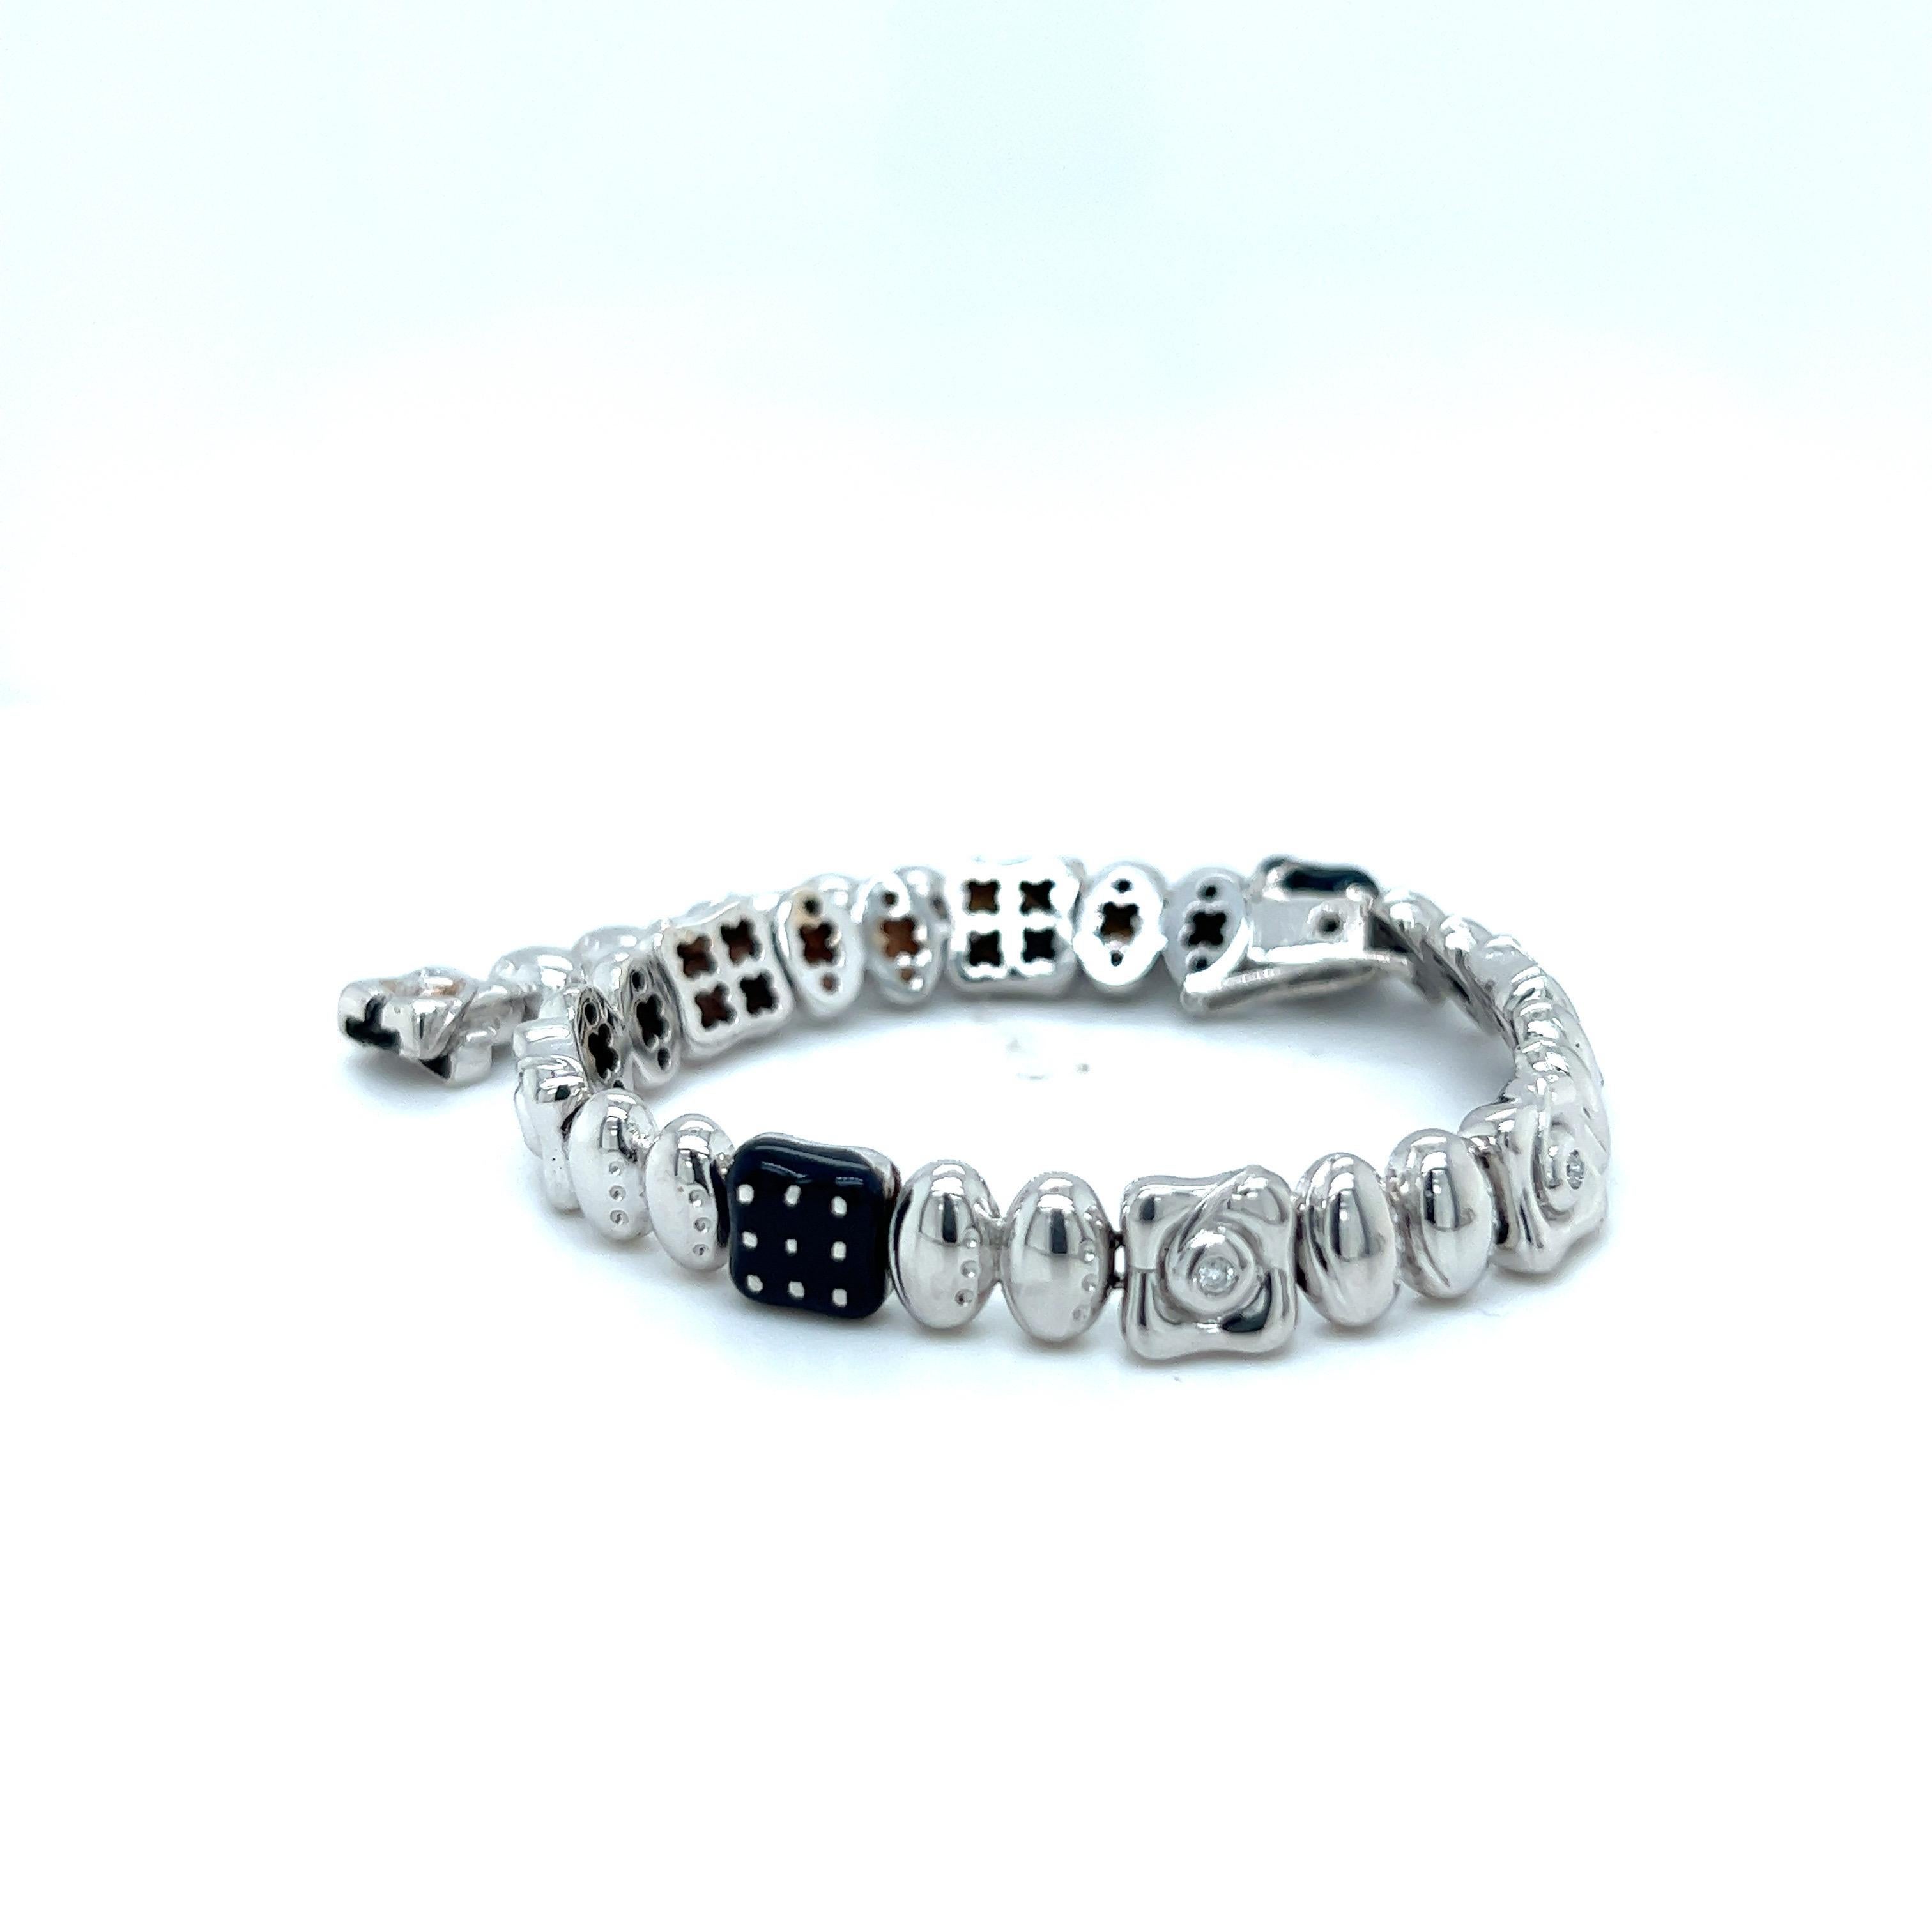 This  18 karat white gold bracelet is designed by the world renowned Italian company La Nouvelle Bague. They are known for their exquisite craftsmanship, marrying the classic with the modern.
This link bracelet is from their Fiori collection.